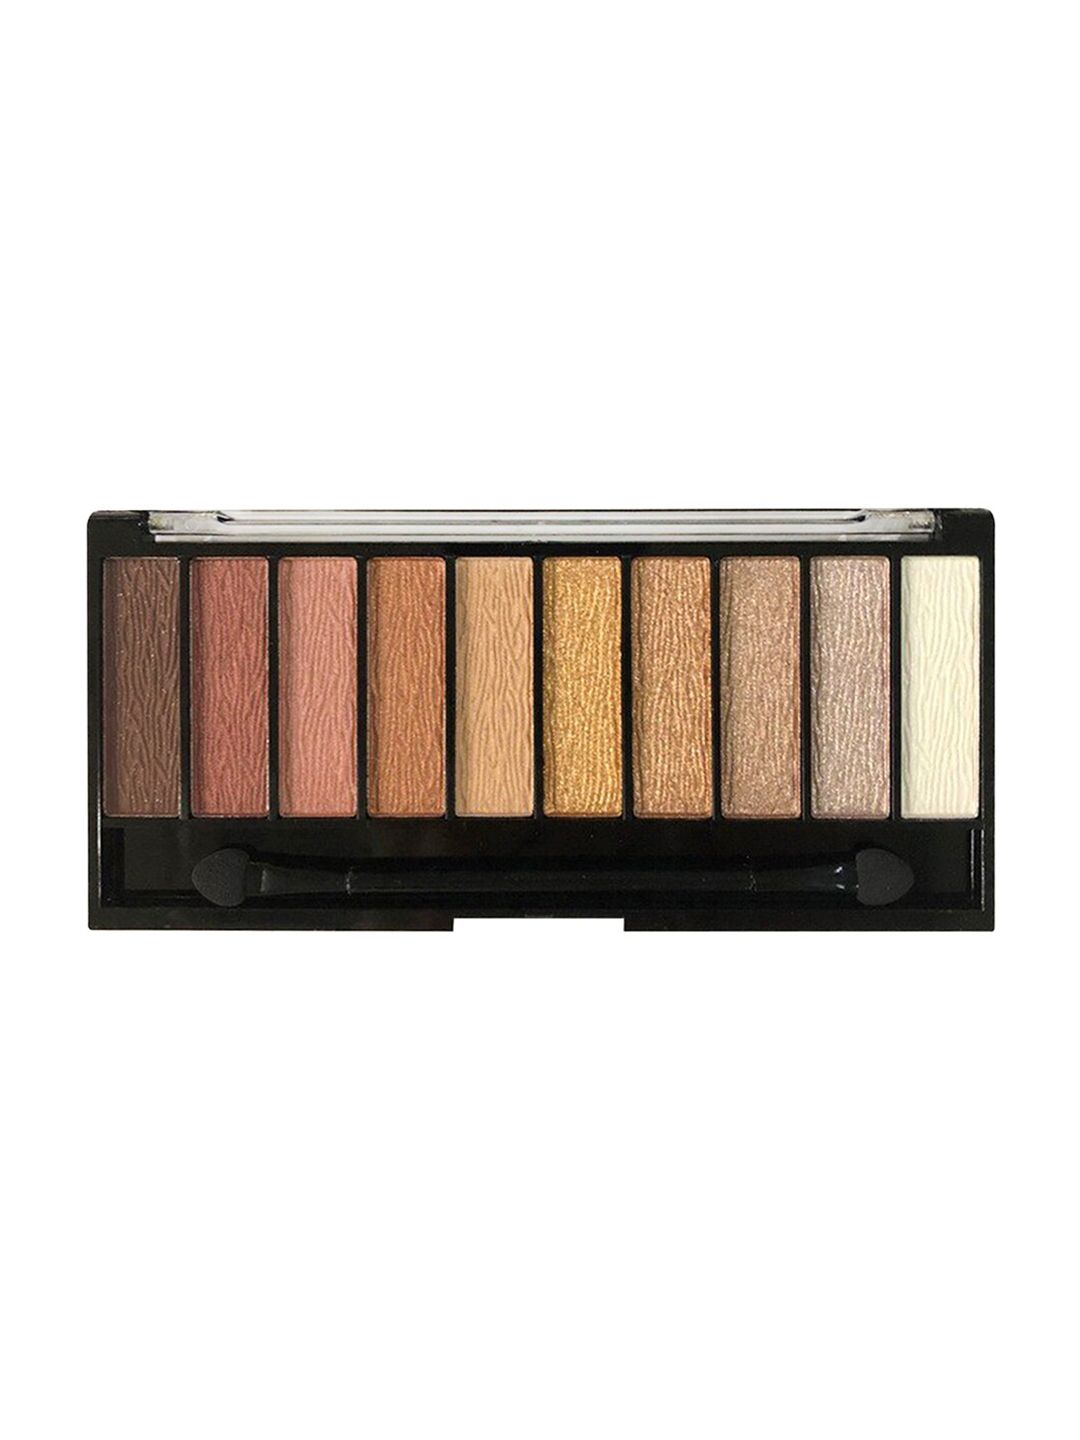 Sivanna Colors Pro Eyeshadow Palette - HF537 01 Price in India